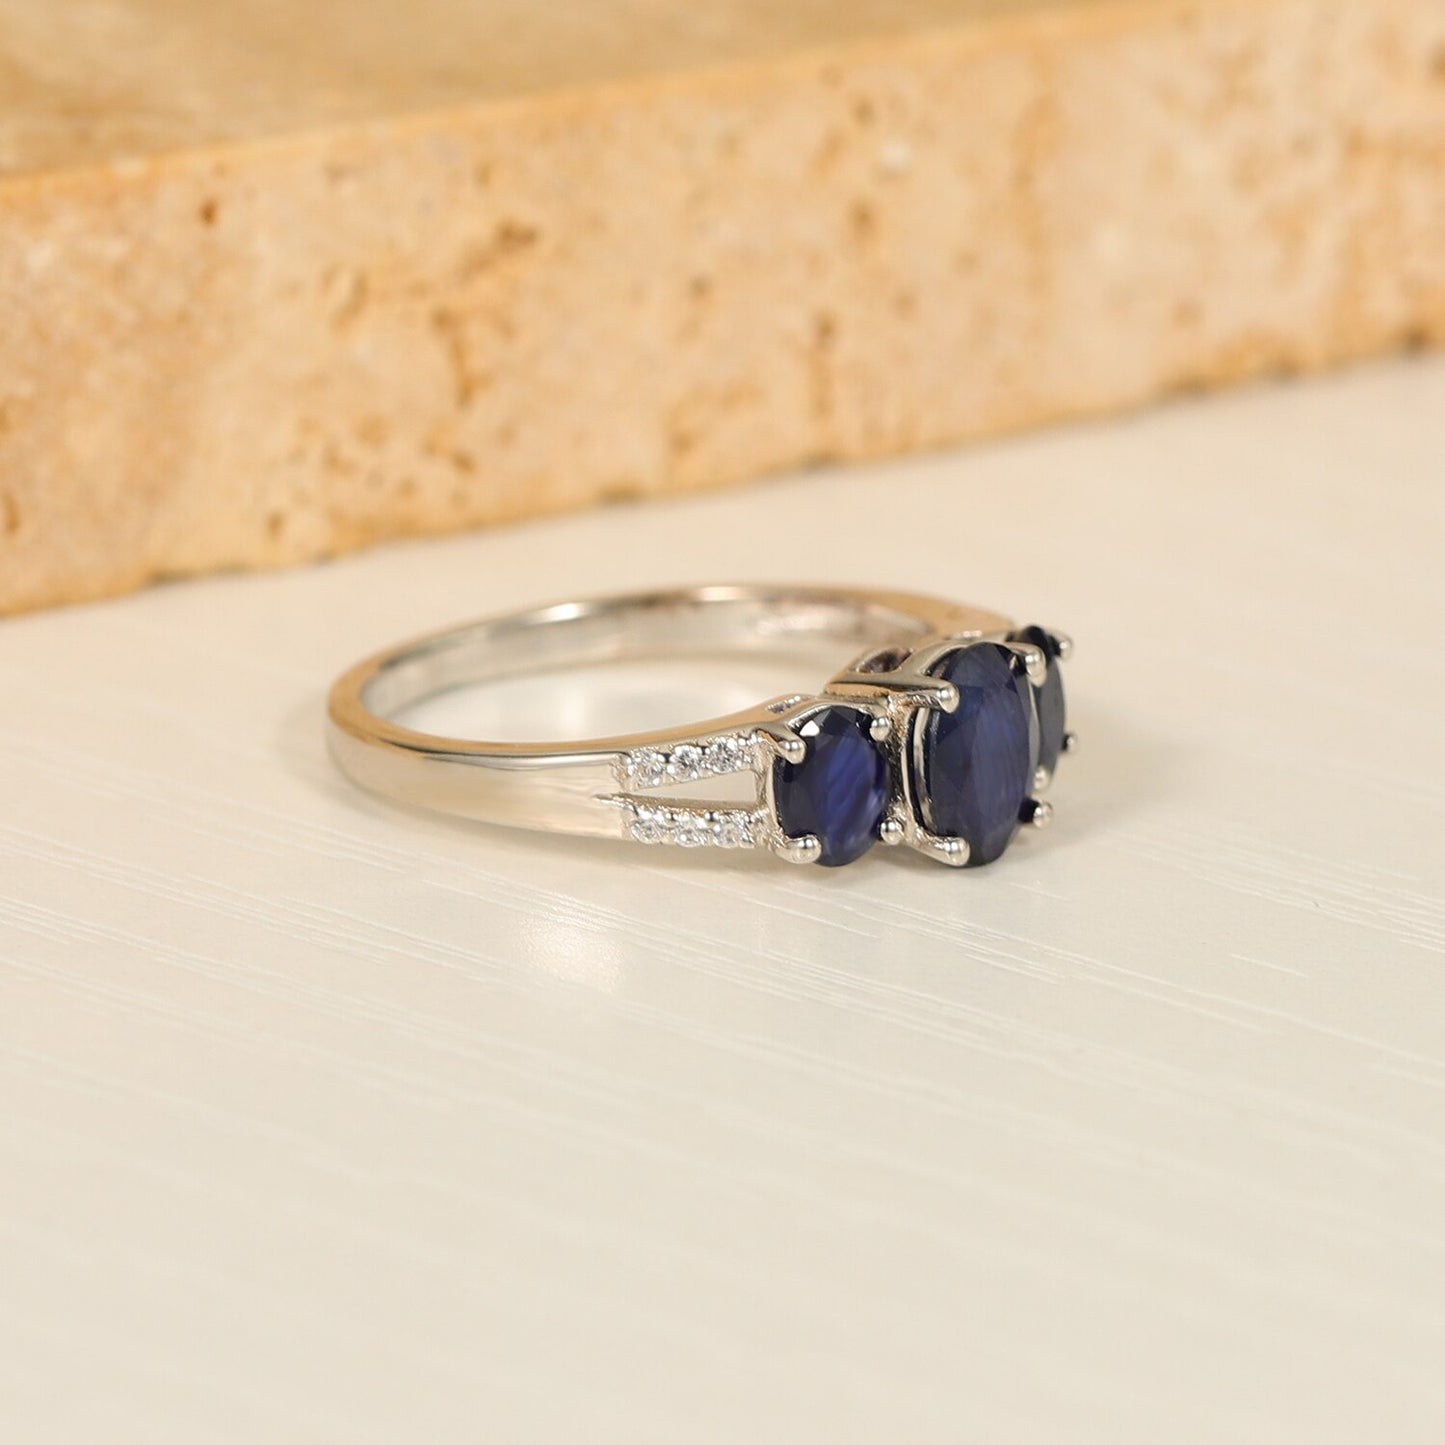 GEM&#39;S BALLET Sapphire Gemstone Rings Natural Blue Sapphire Three Stone Engagement Rings in 925 Sterling Silver Gift For Her